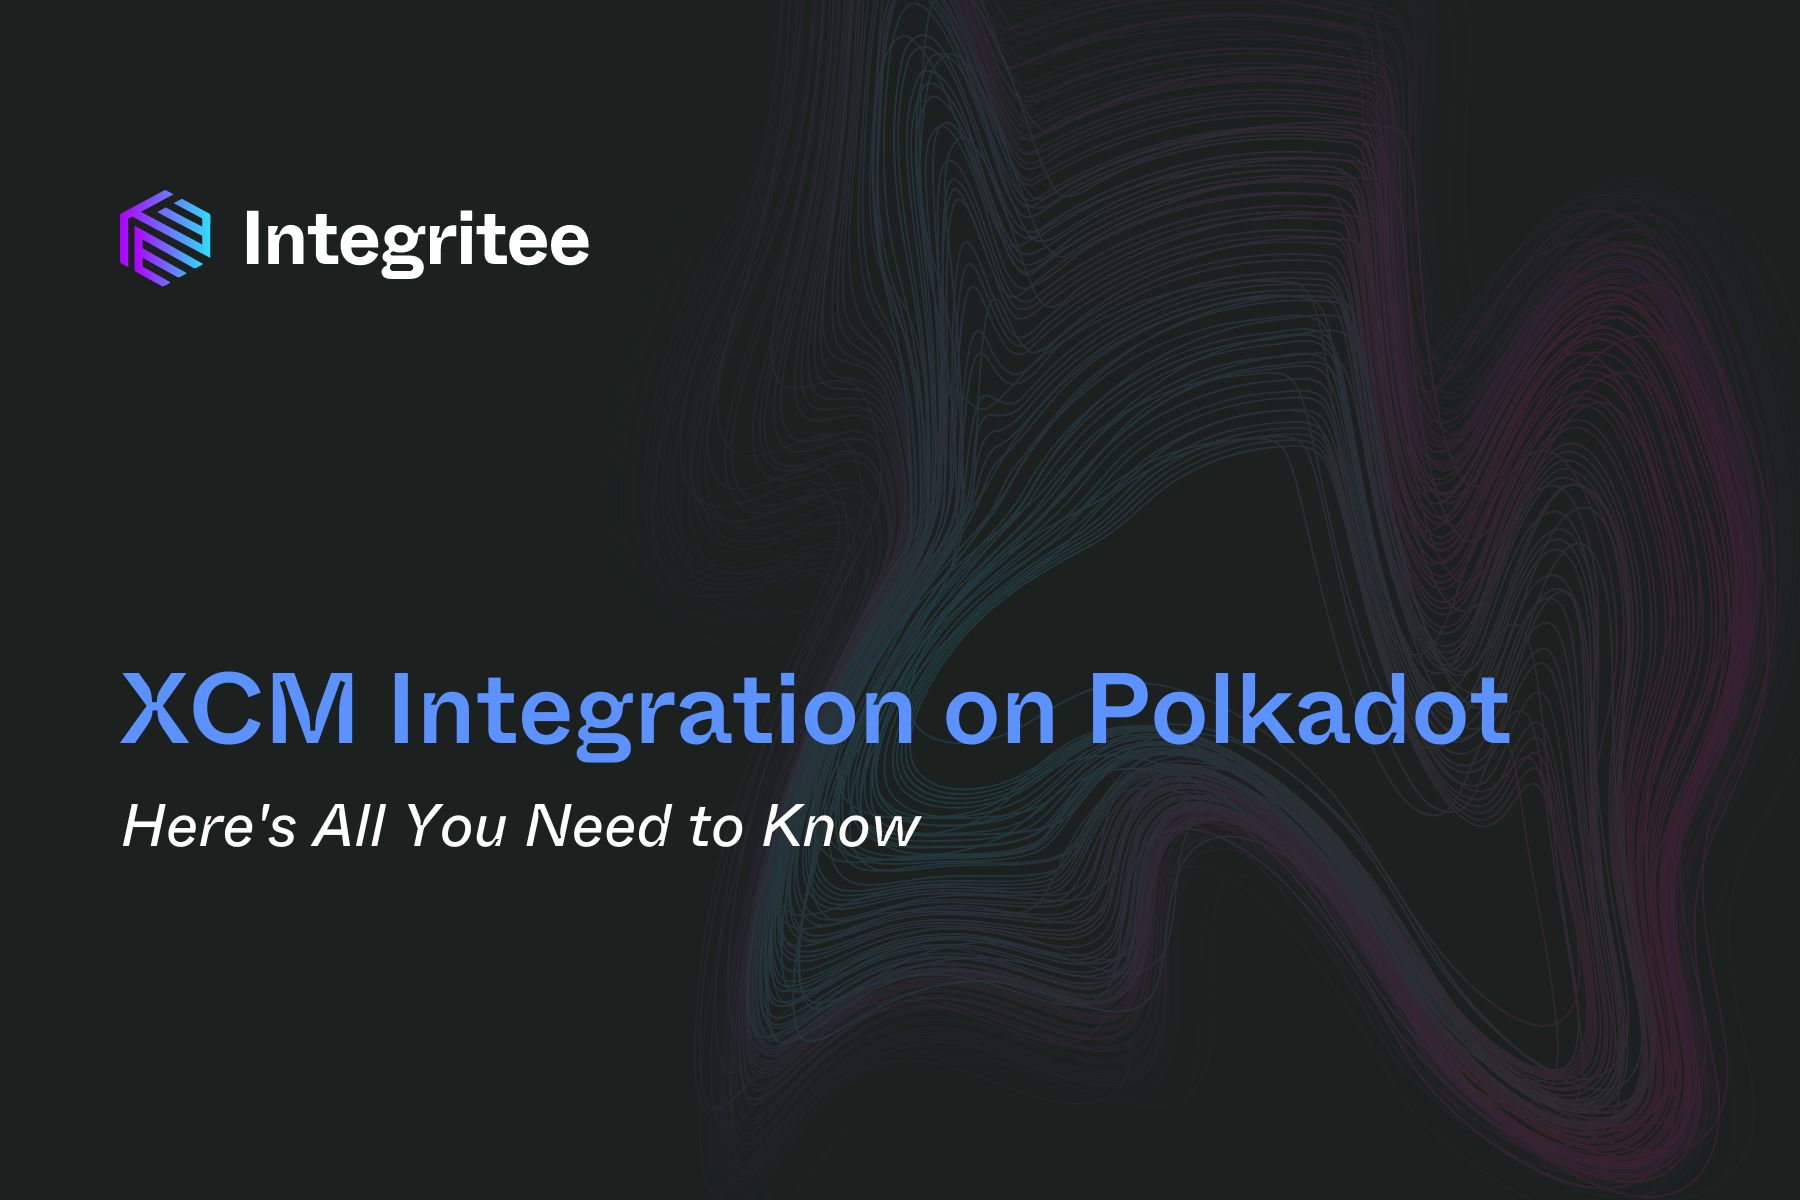 Here’s What You Need to Know About XCM Integration on Polkadot